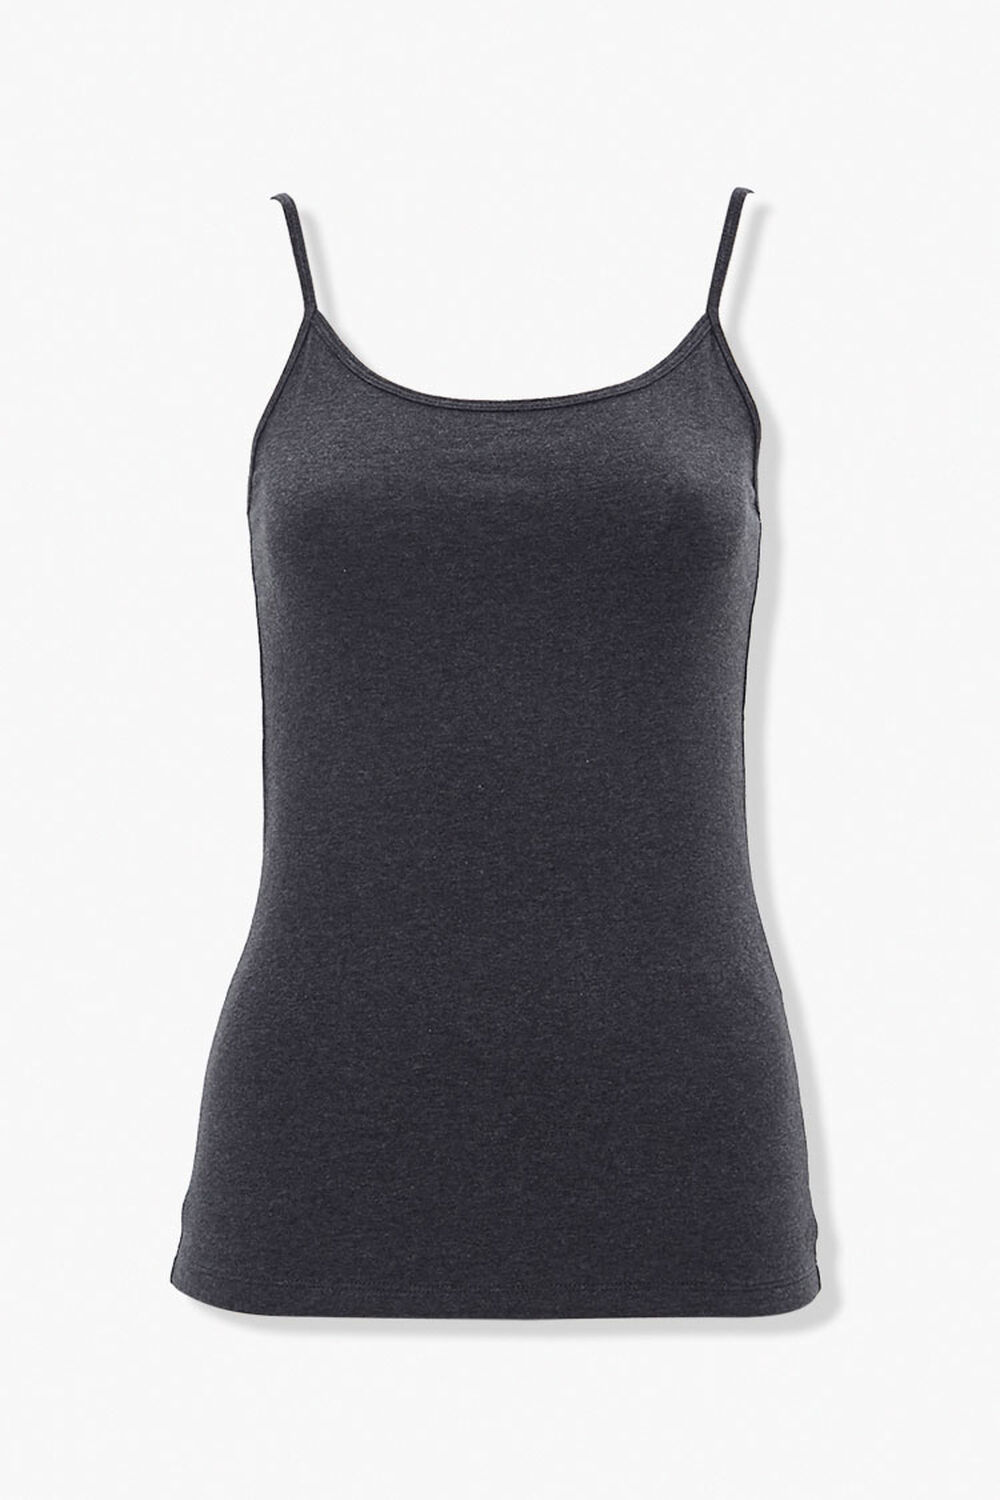 CHARCOAL HEATHER Basic Cotton-Blend Cami, image 1